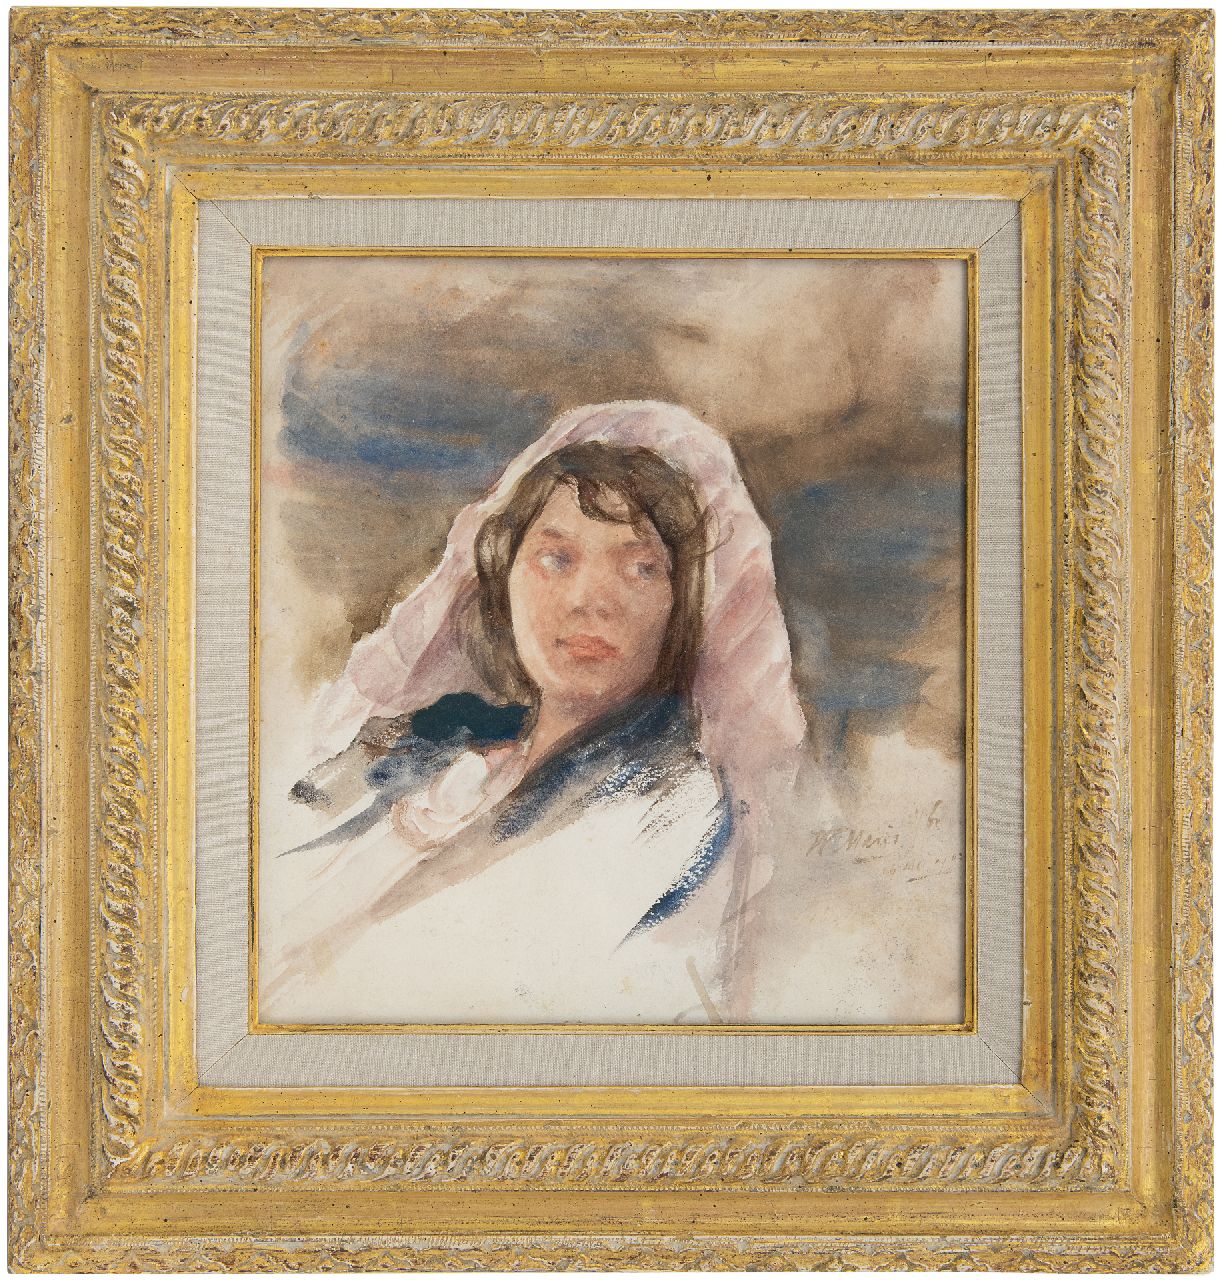 Maris W.M.  | 'Willem' Matthijs Maris | Watercolours and drawings offered for sale | Young woman in a cape, watercolour on paper 24.2 x 22.1 cm, signed l.r. and dated 16 mei 1903